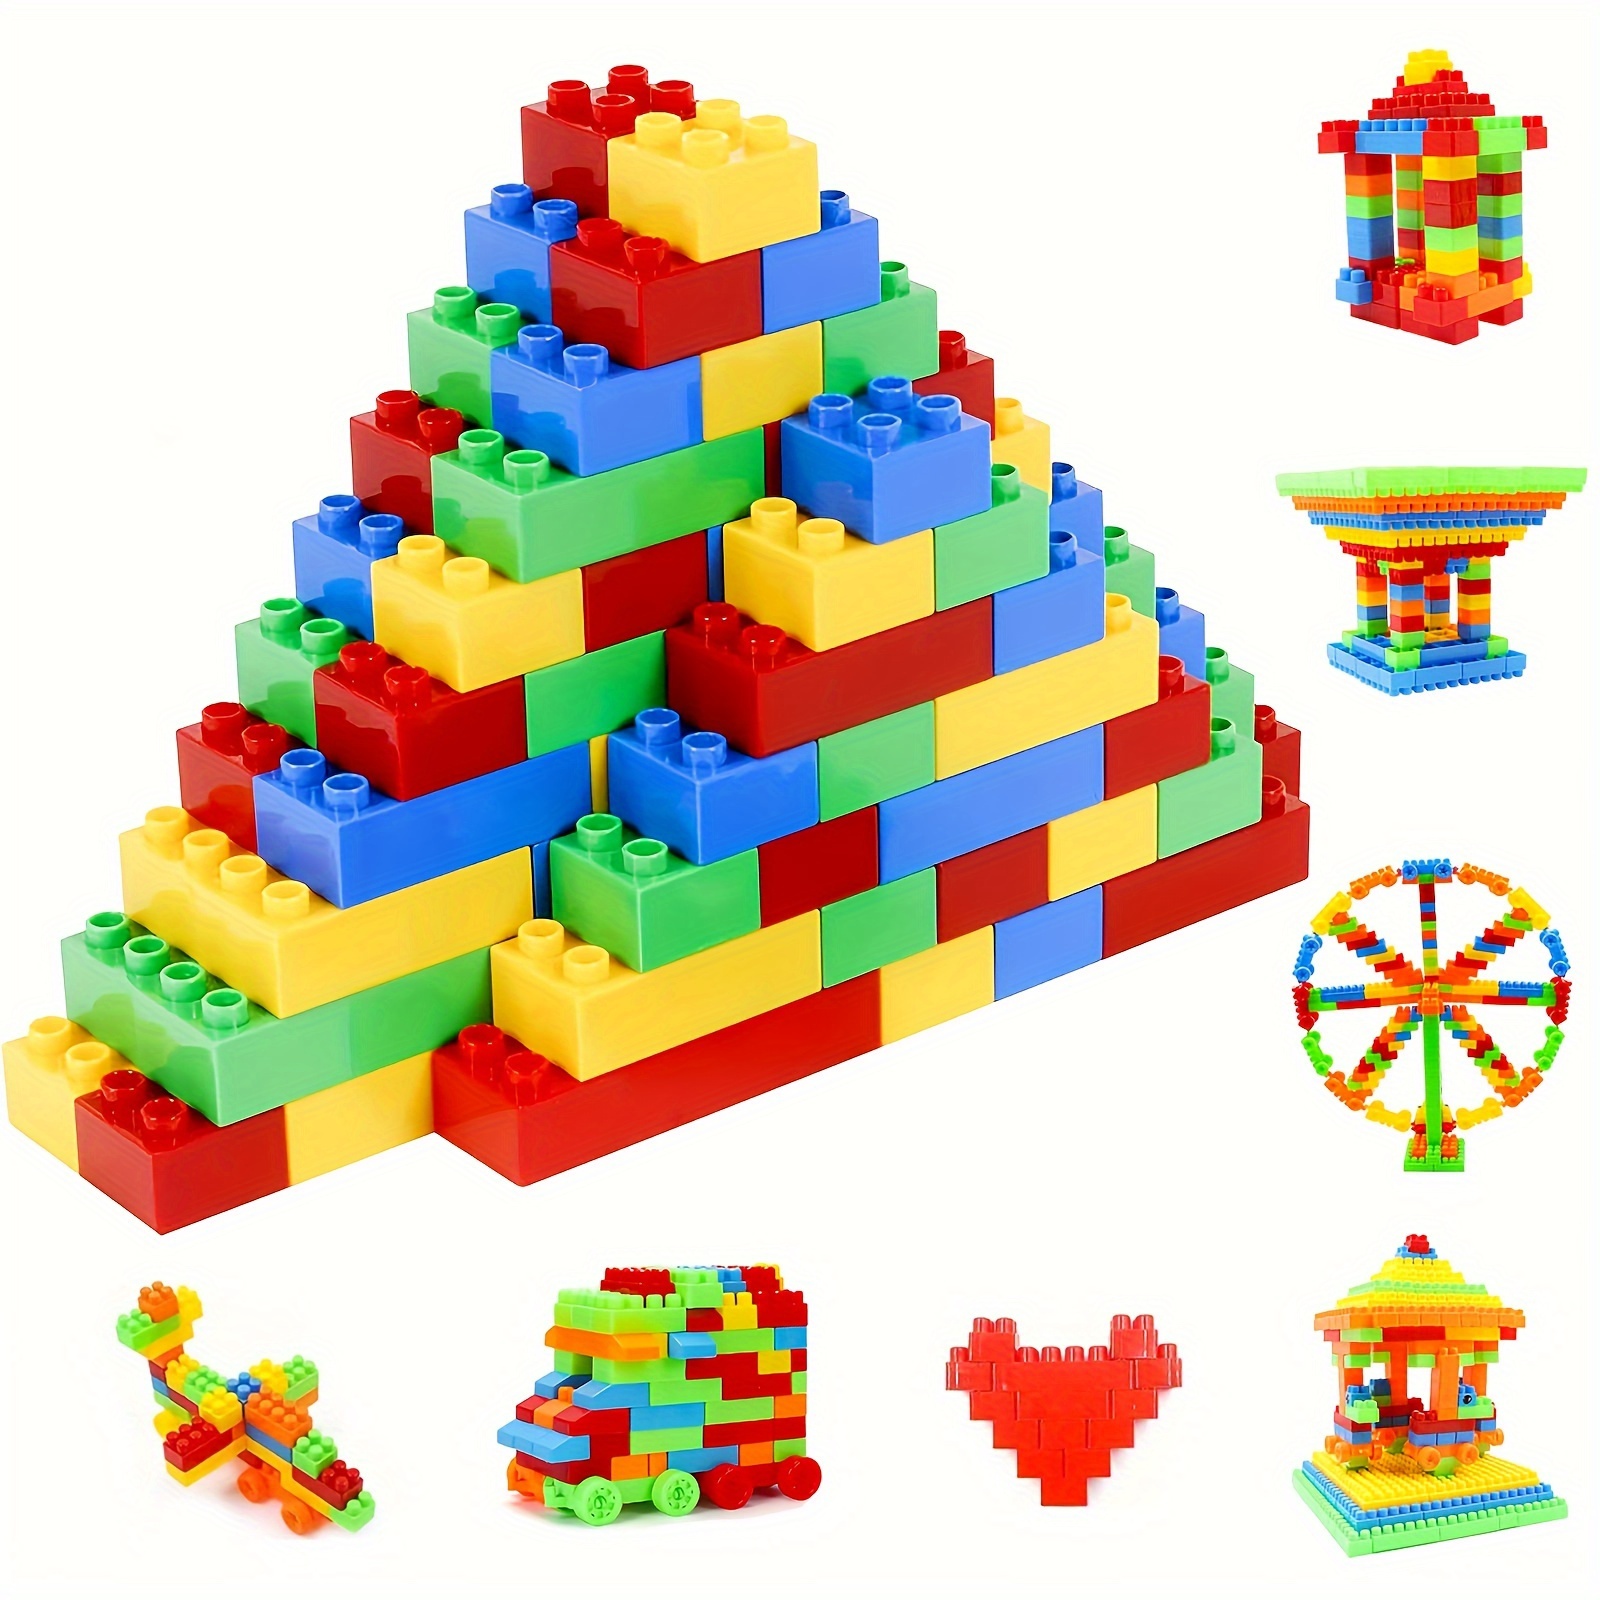 

102pcs Building Blocks Set For Kids - Educational Puzzle Interlocking Toy Bricks, Diy Creative Developmental Playset For Ages 3-6, Safe Pp Material, Ideal Gift For Boys & Girls (assorted Colors)